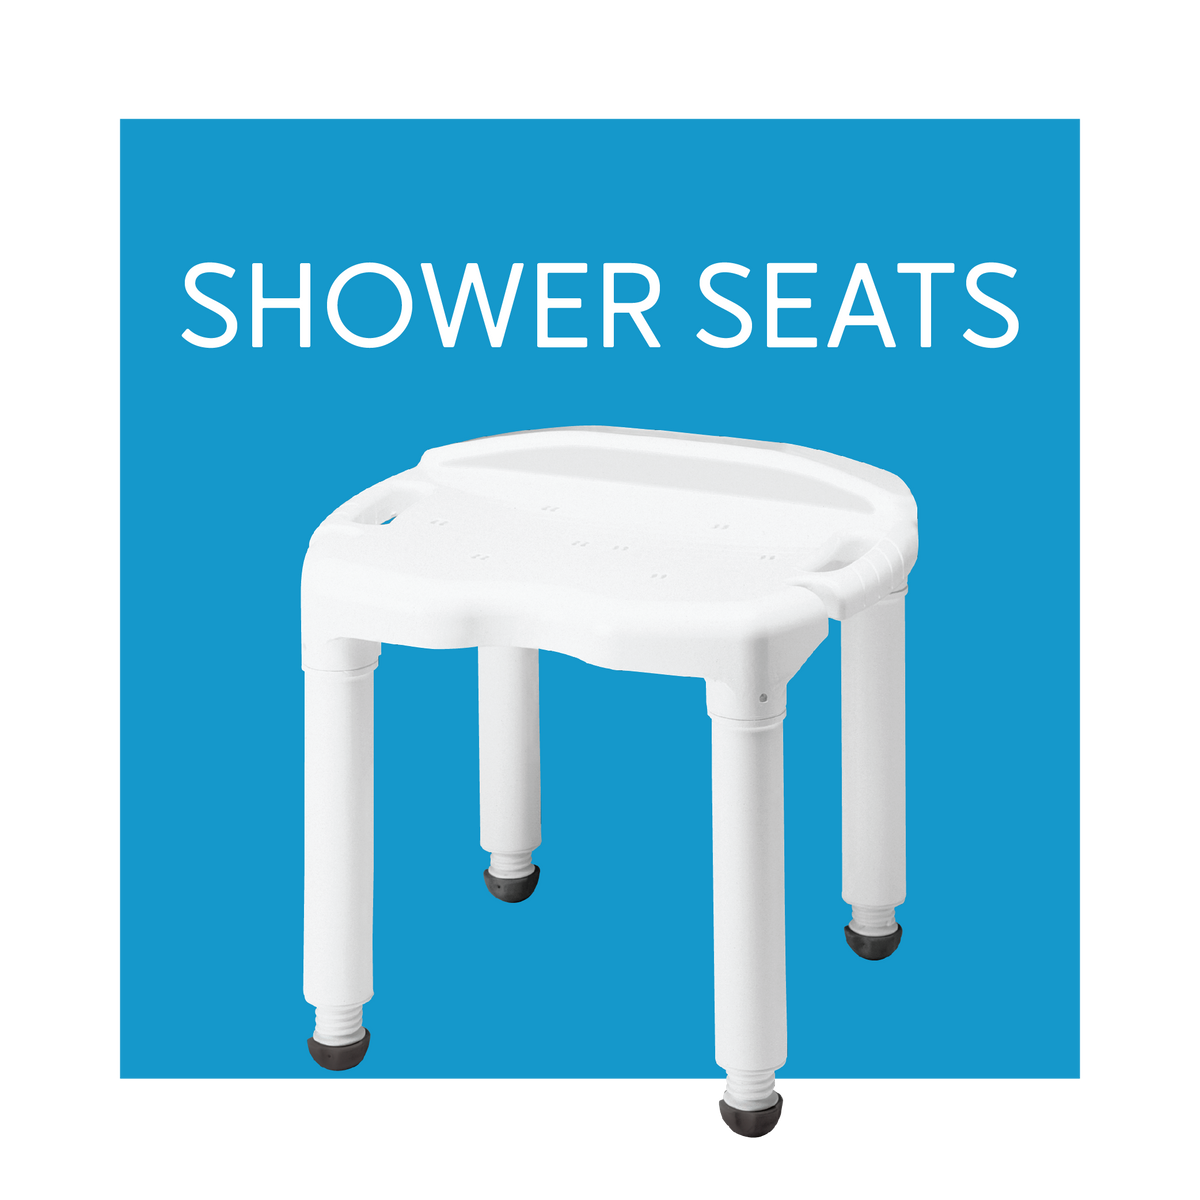 A shower seat on a blue background